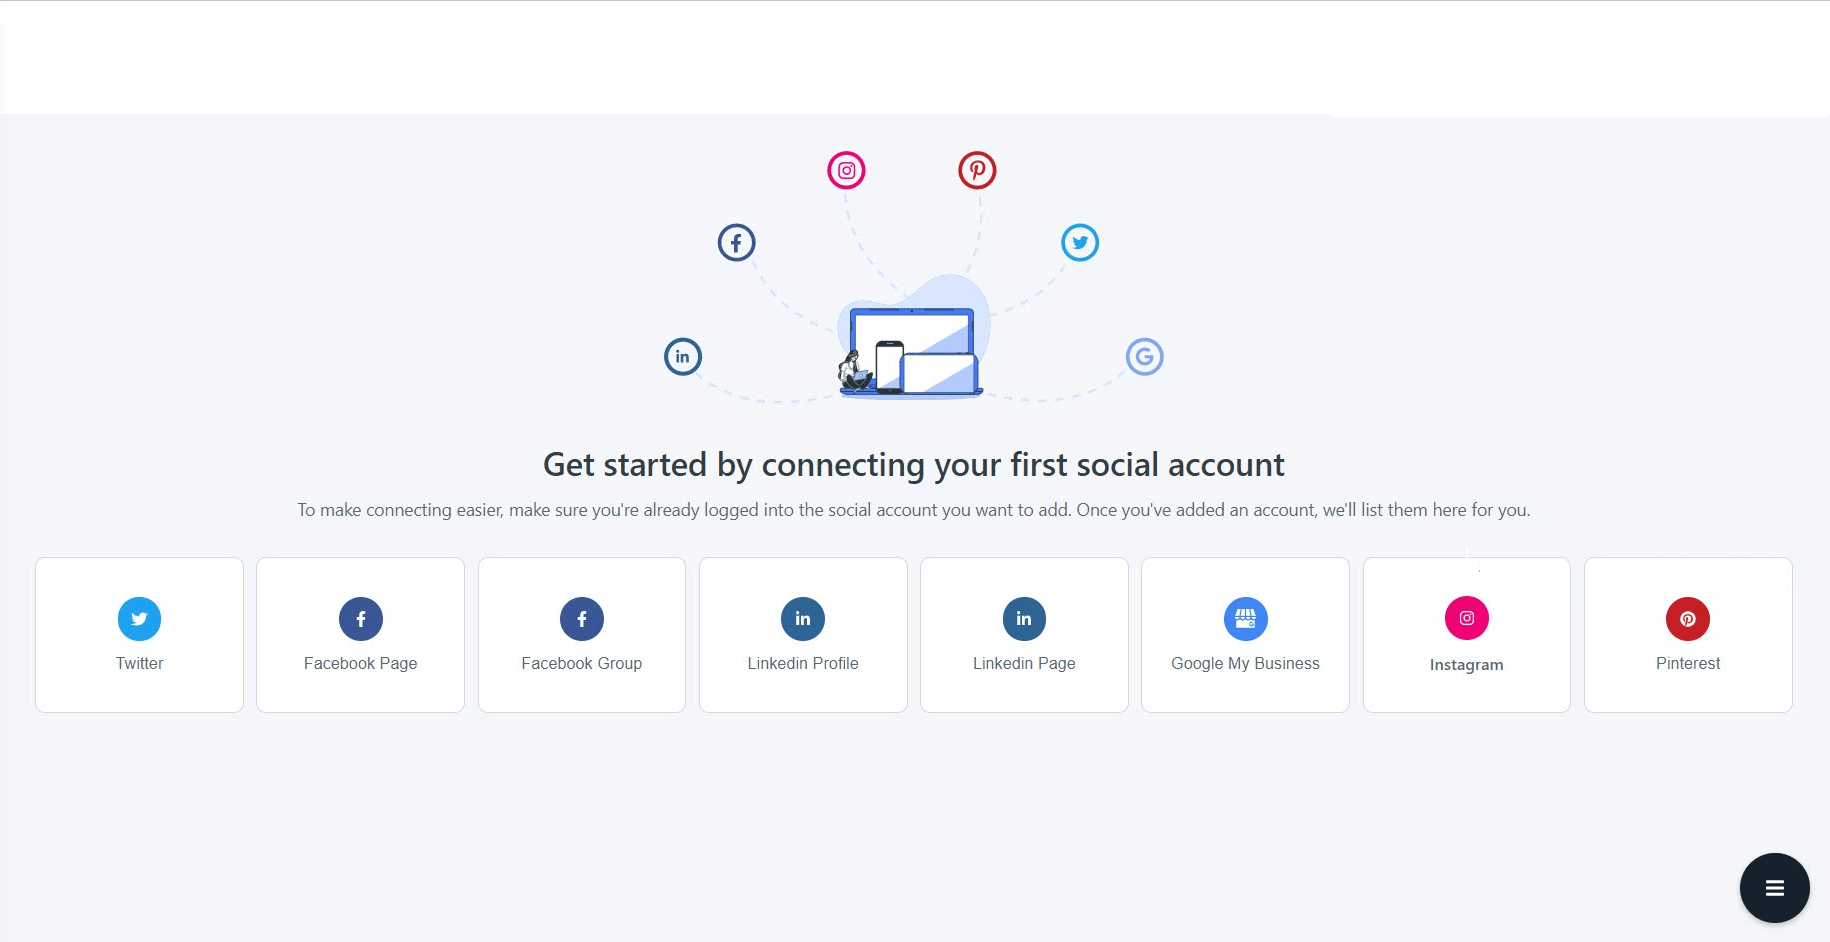 You can select the account you want to connect.